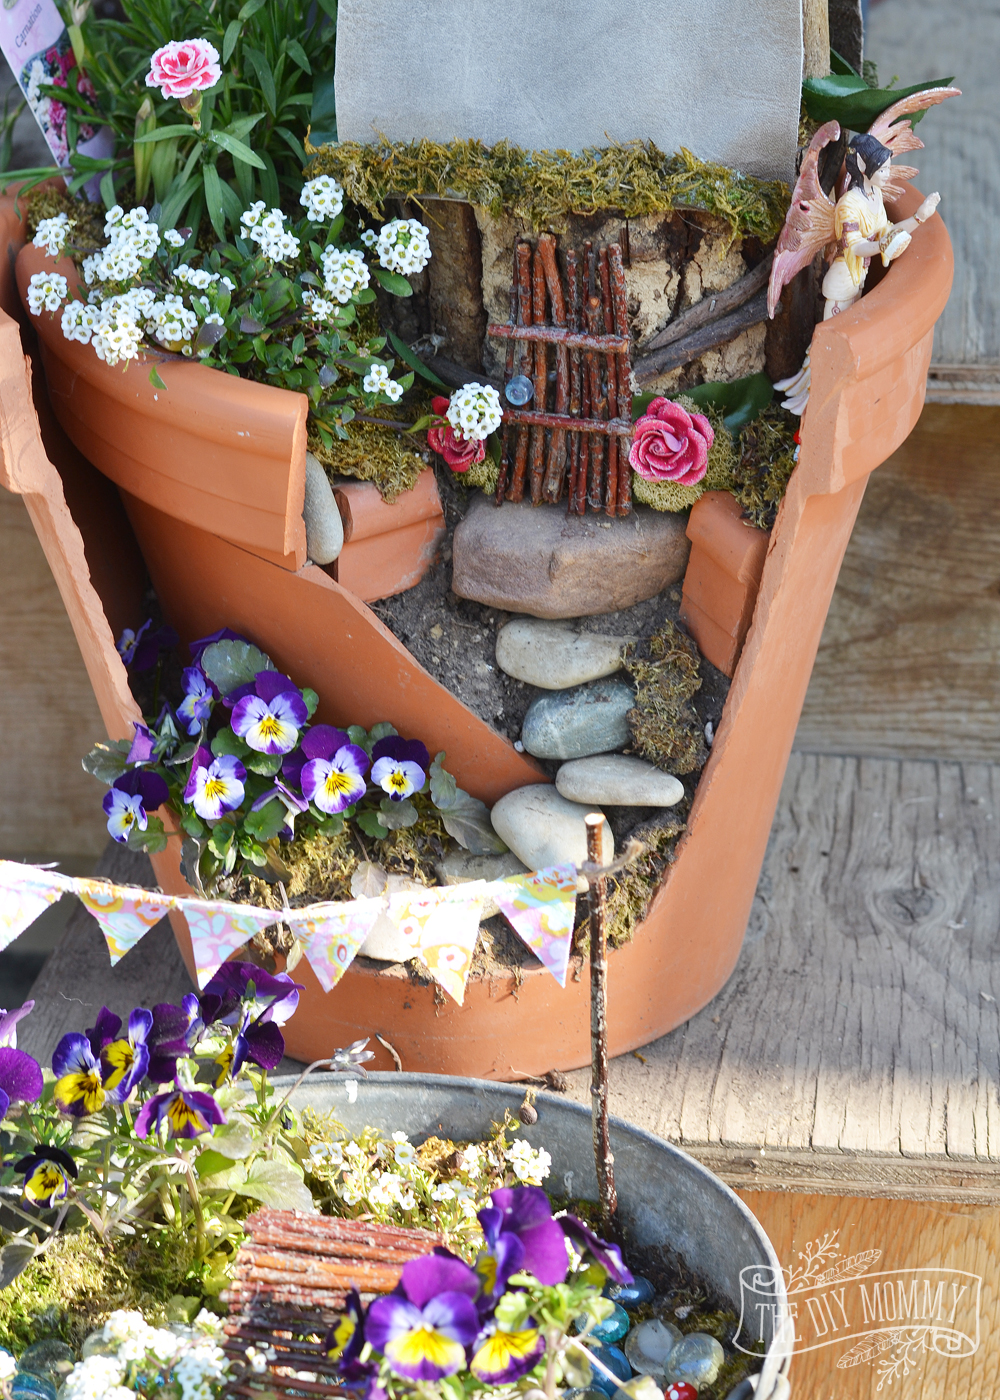 Easy + Inexpensive Fairy Garden: A broken pot, some props made of sticks, and some imagination make a sweet potted fairy garden that doesn't break the bank!